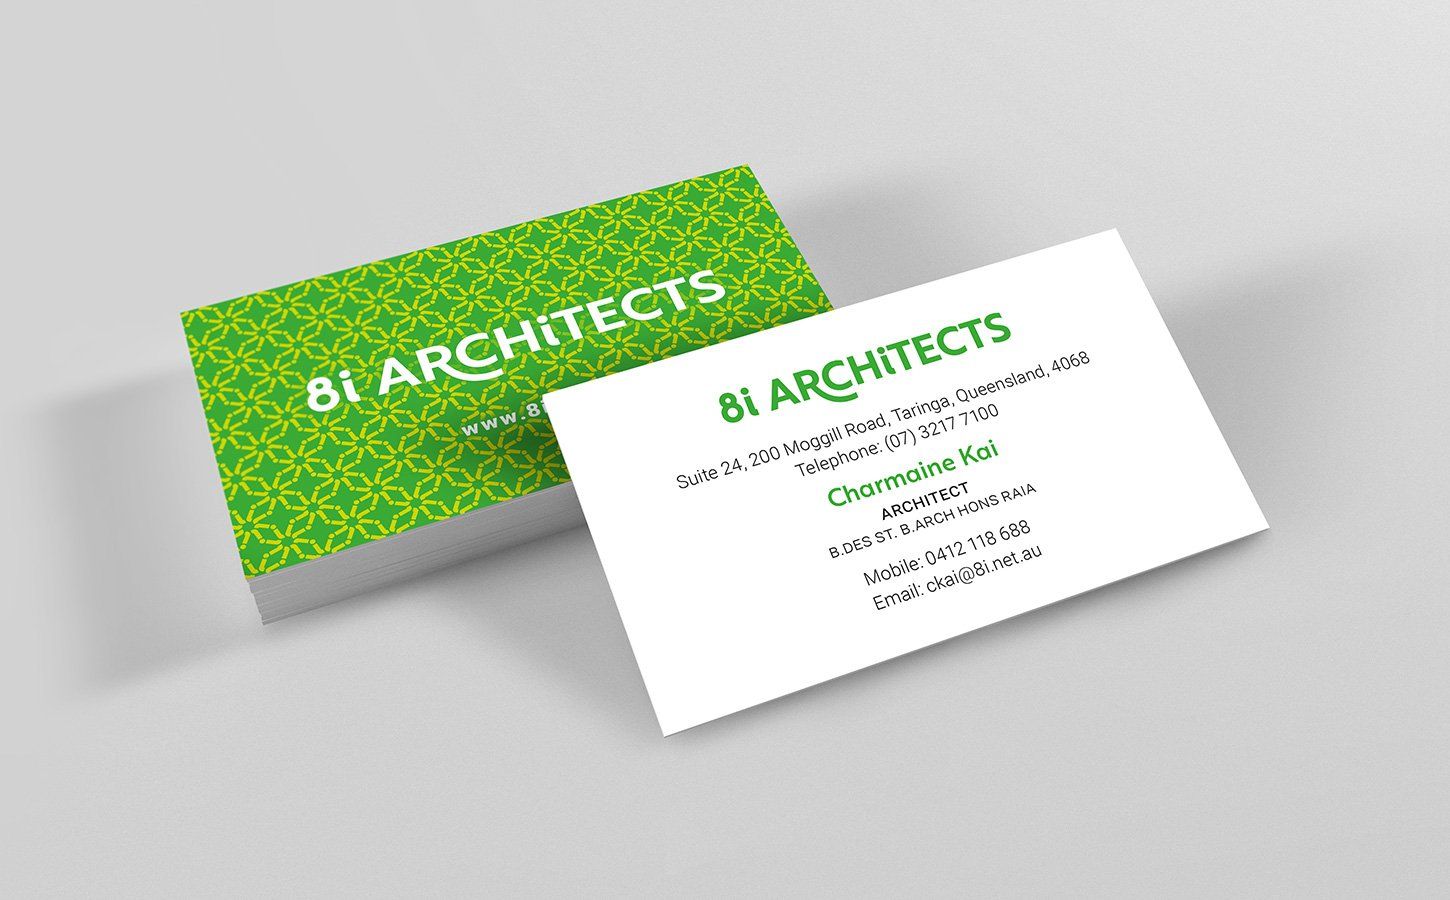 8i Architects Business Cards